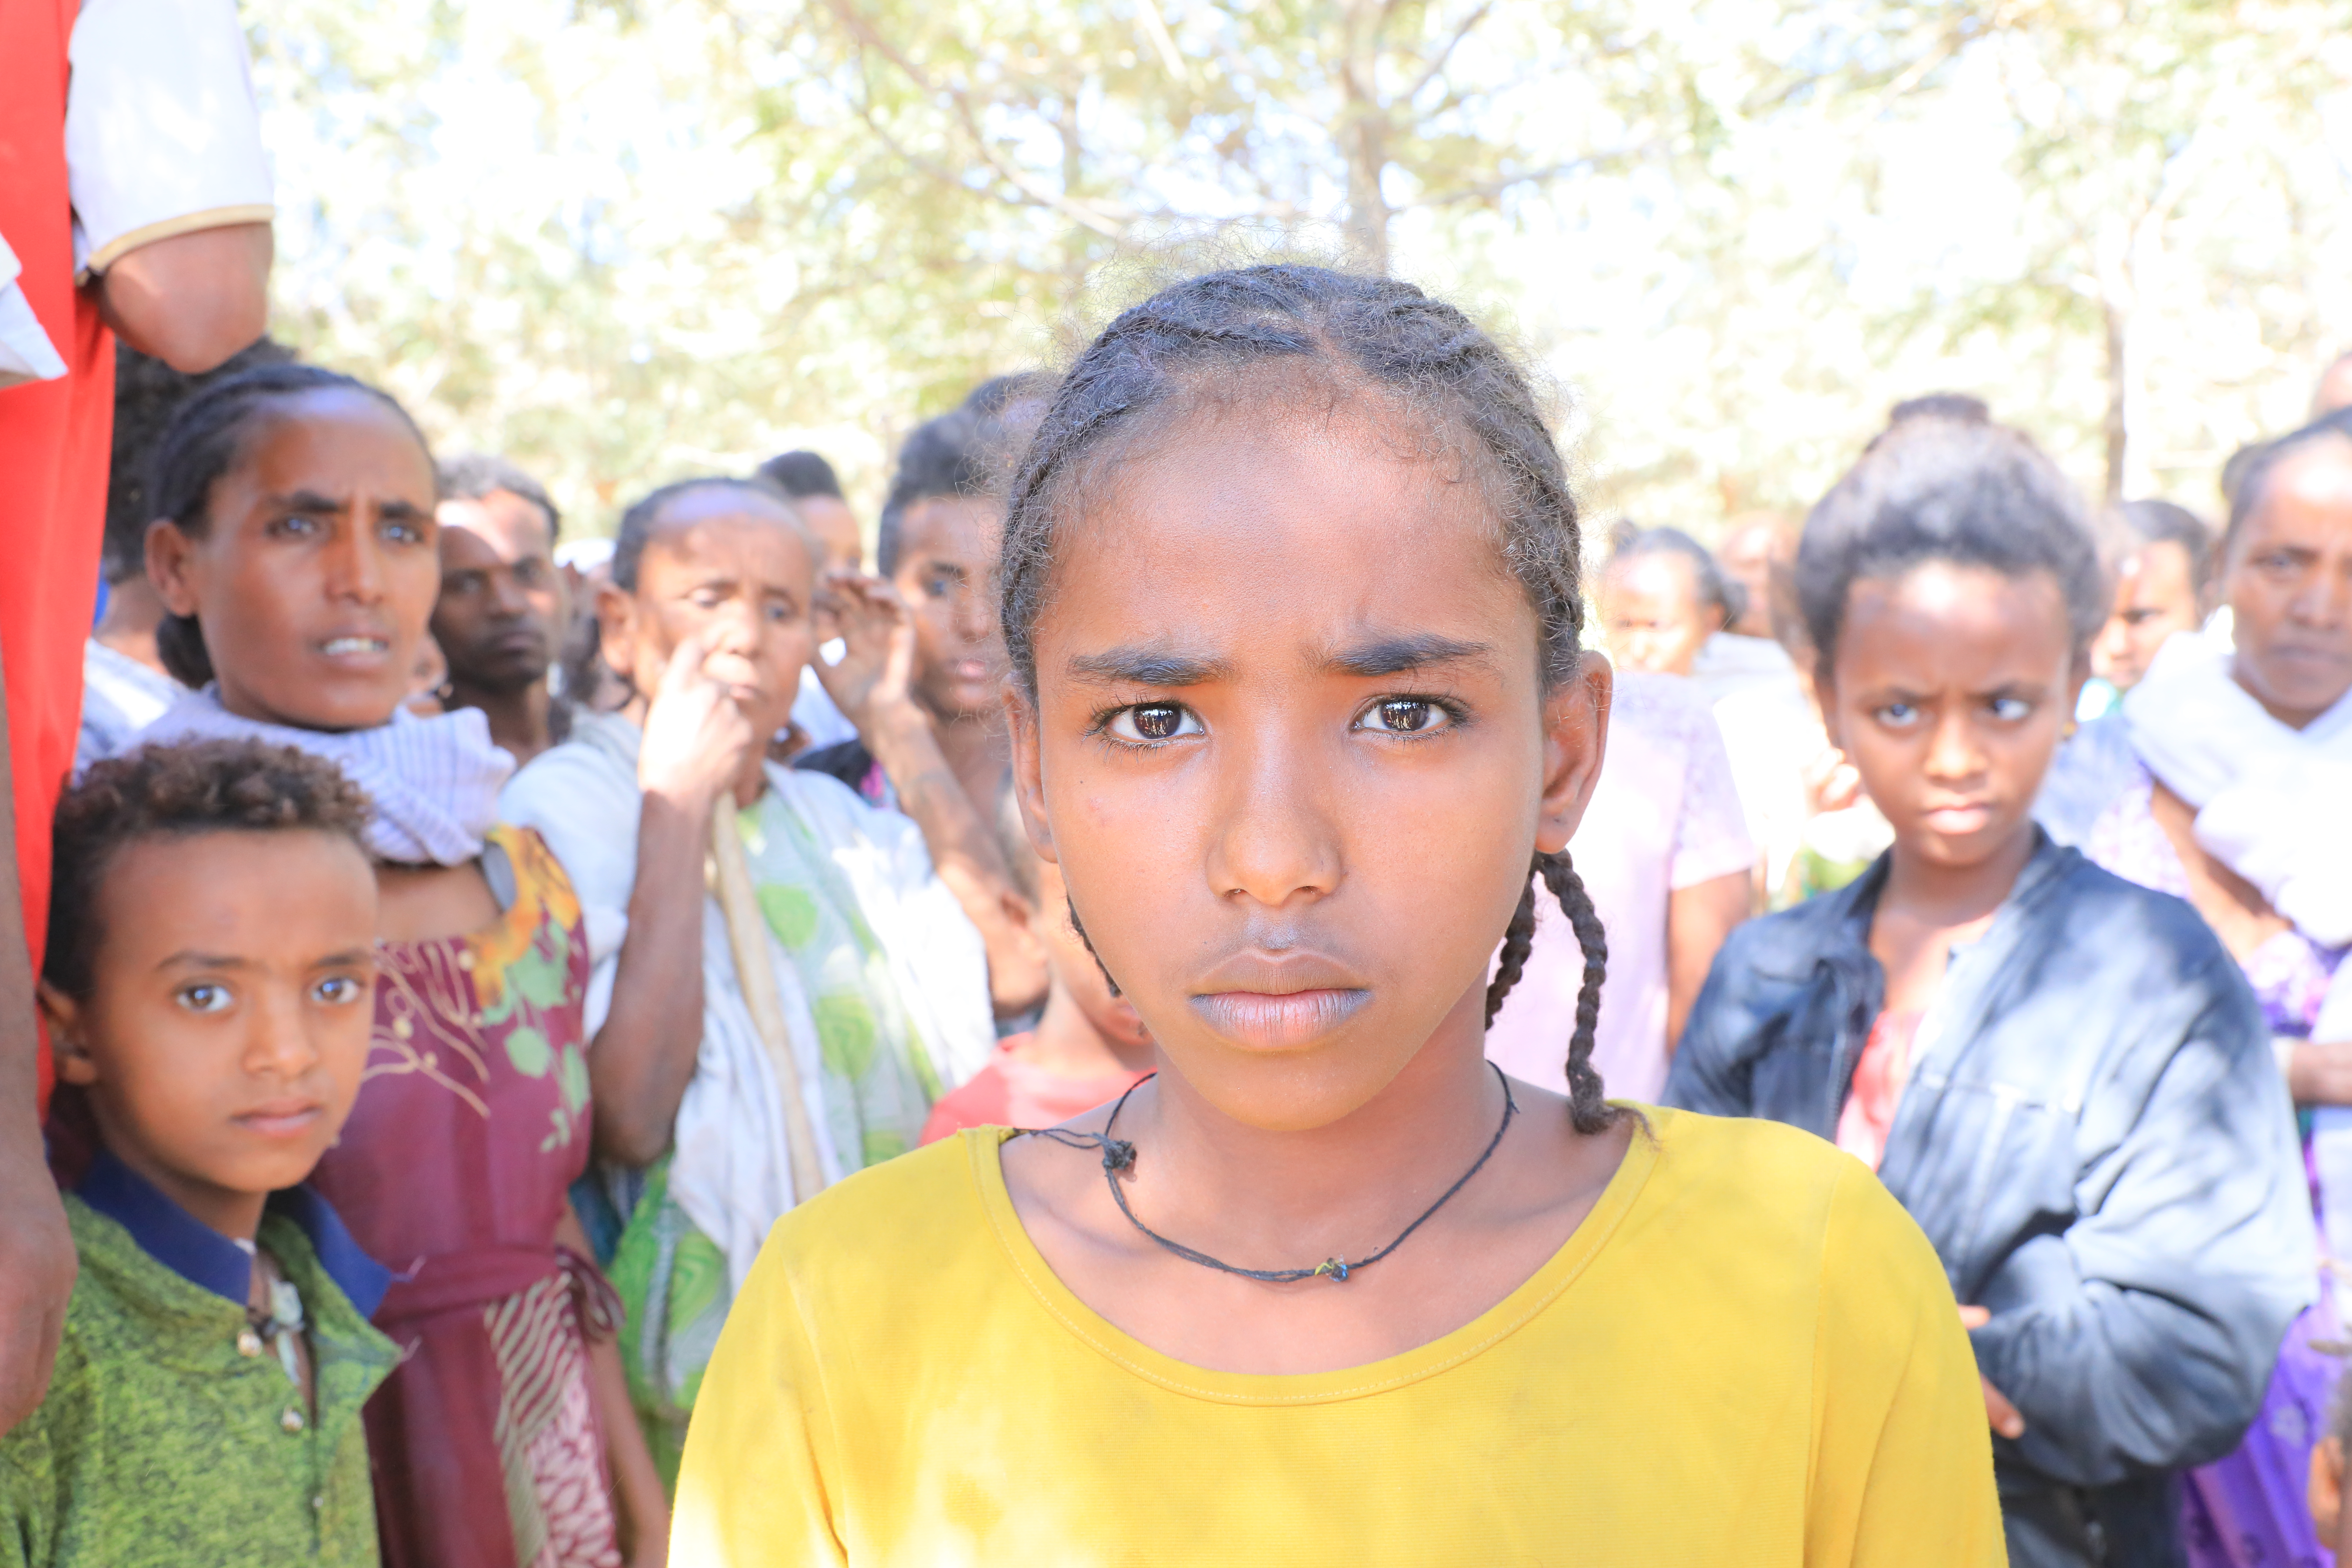 A group of girls from Ethiopia looking at the camera